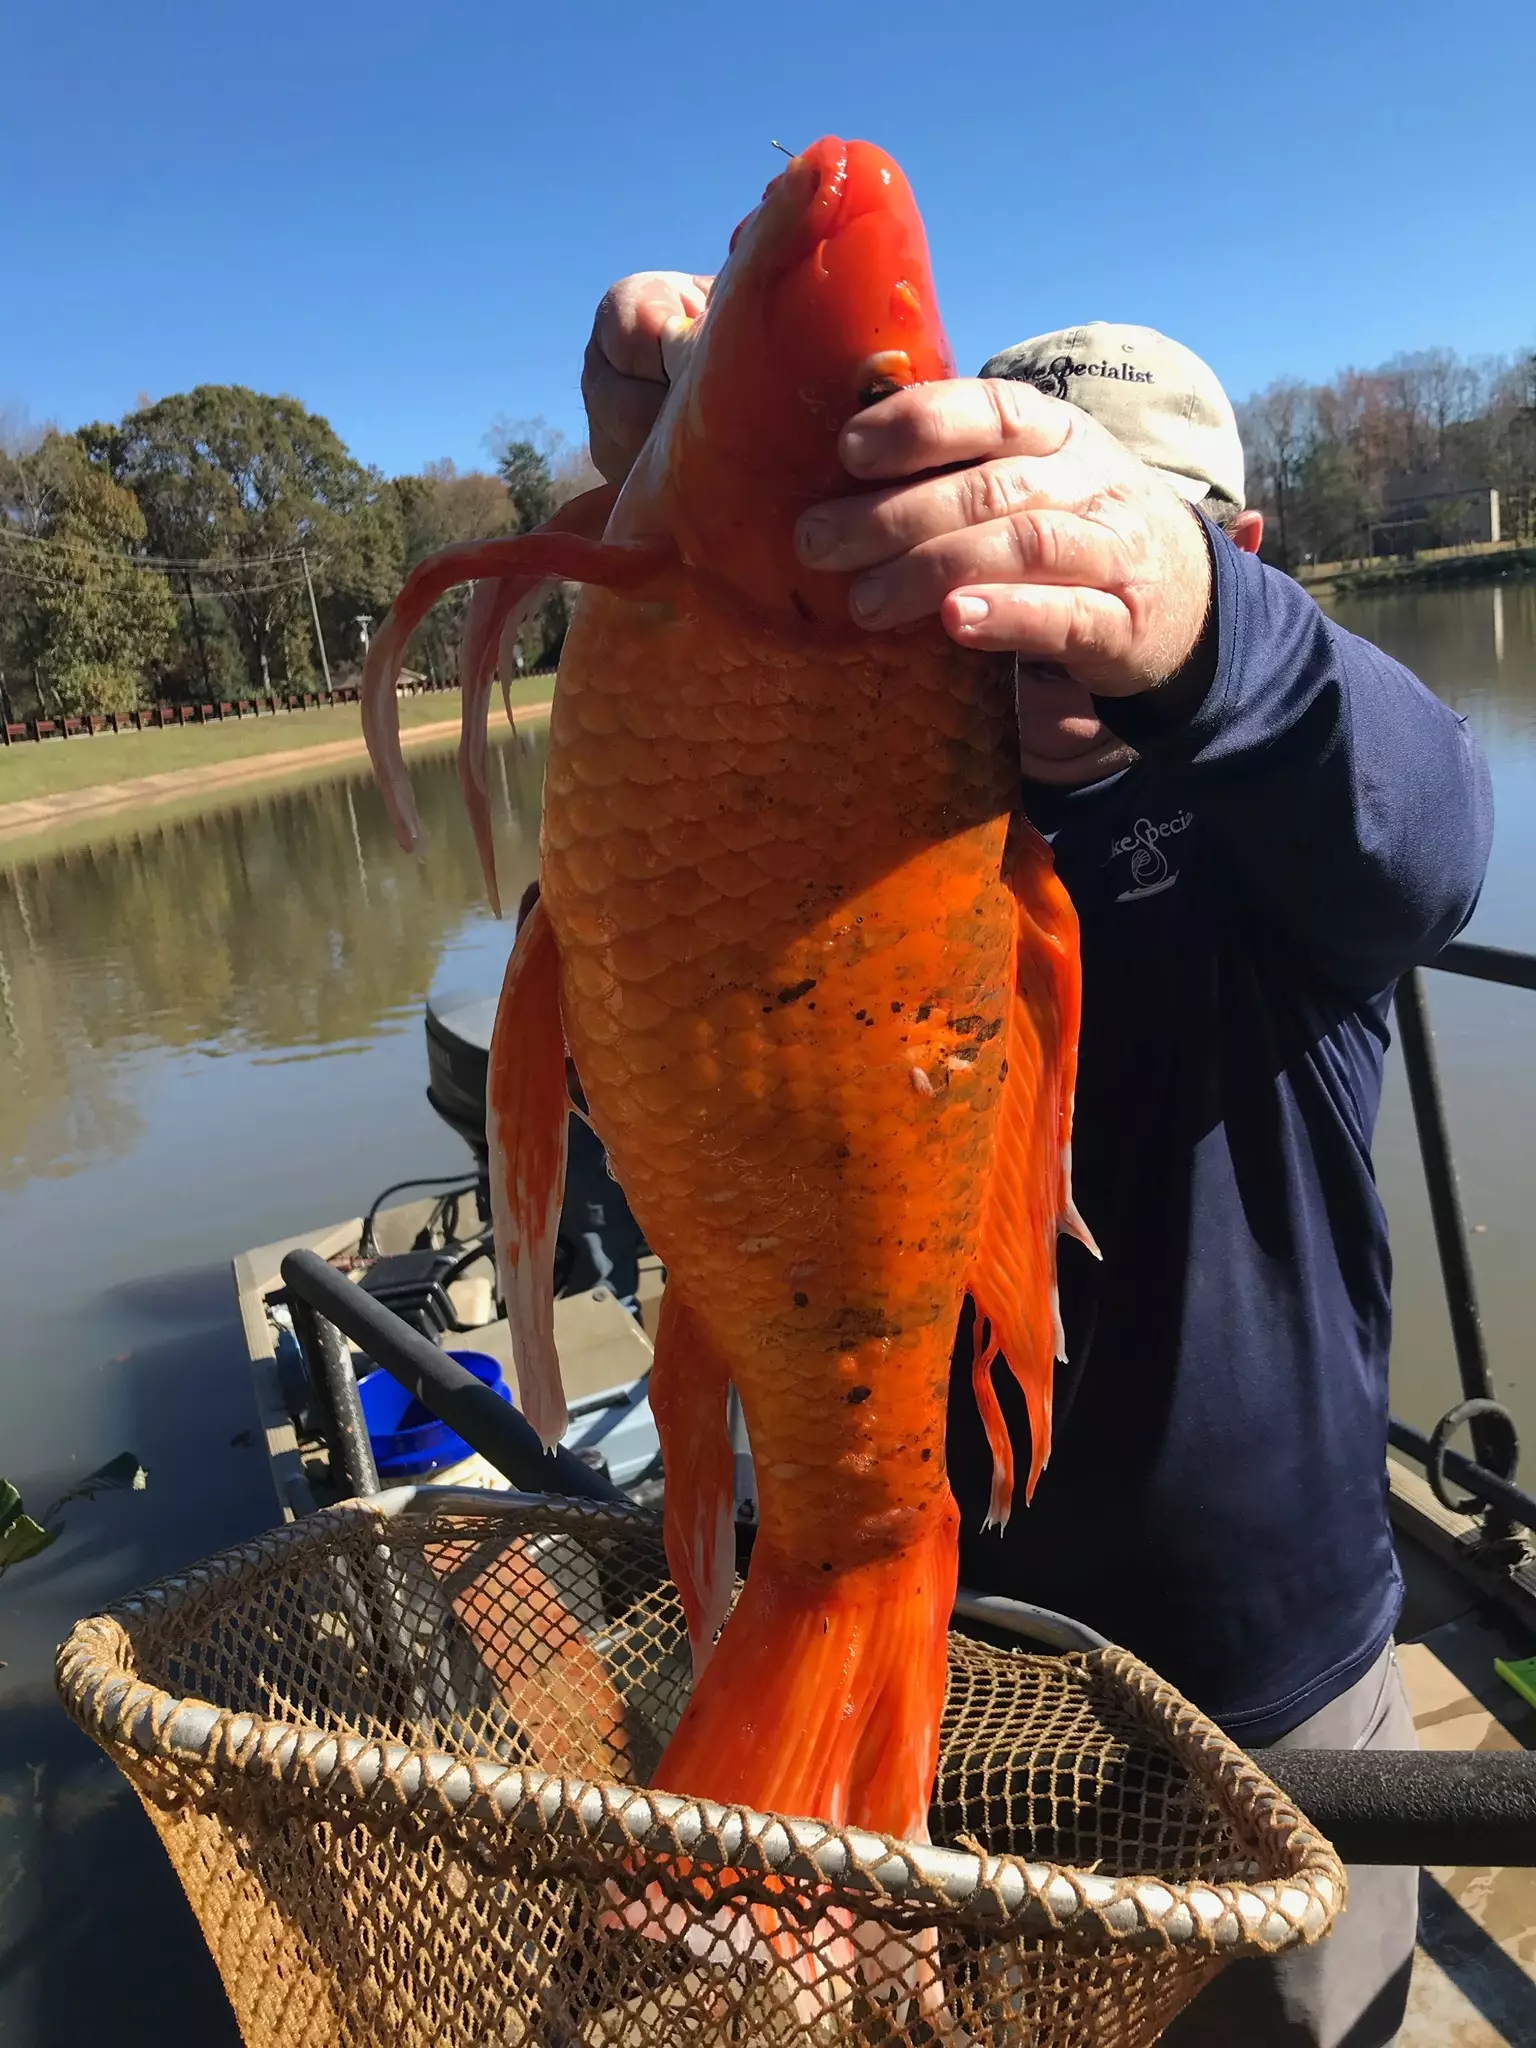 The massive 'goldfish' was found during a routine check of the lake.